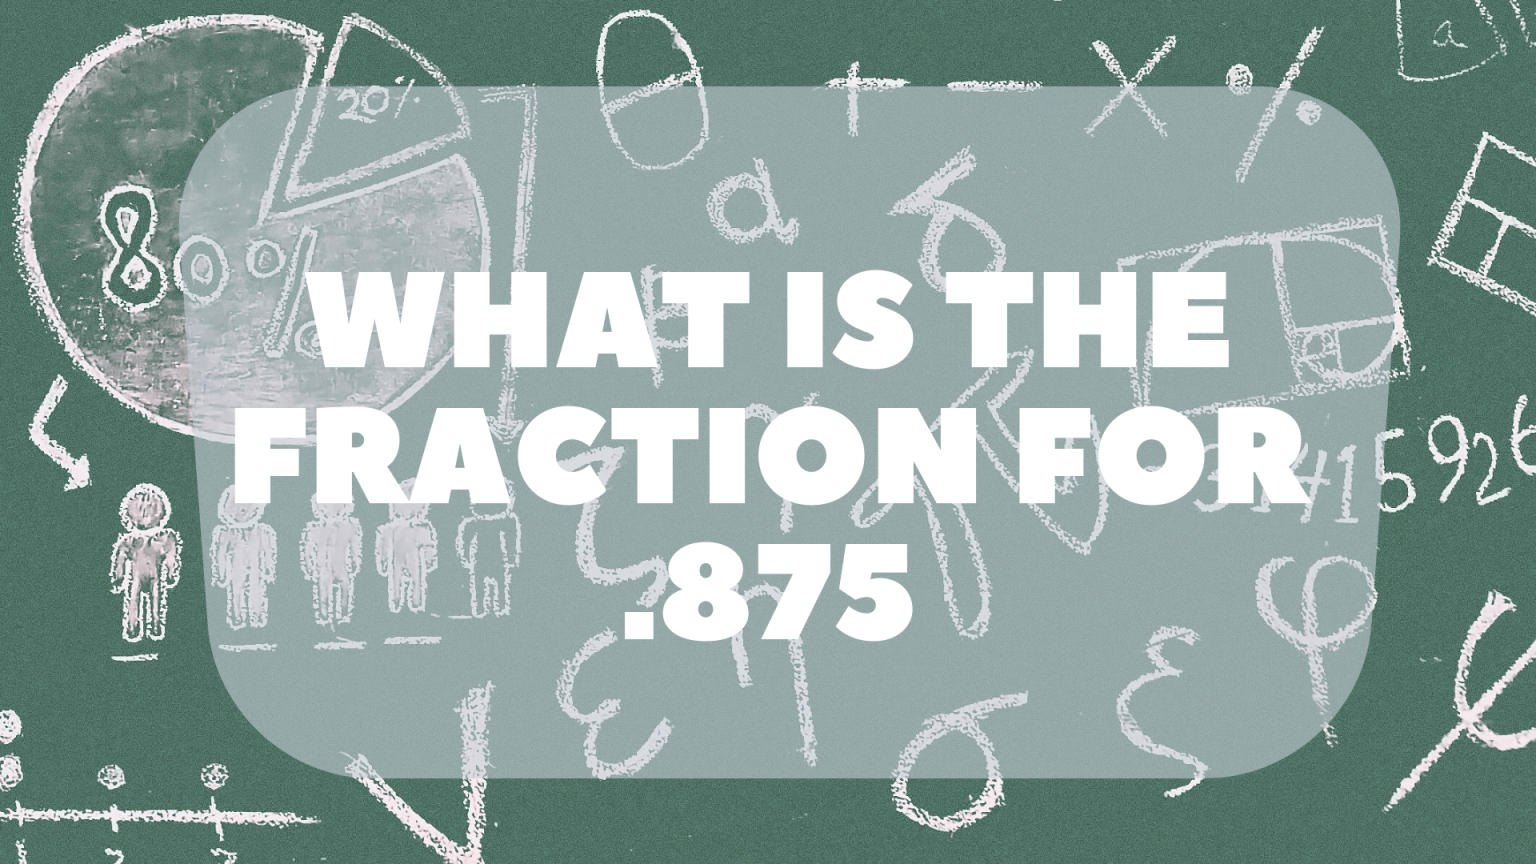 easily-calculate-0-875-as-a-fraction-in-the-simplest-form-science-trends